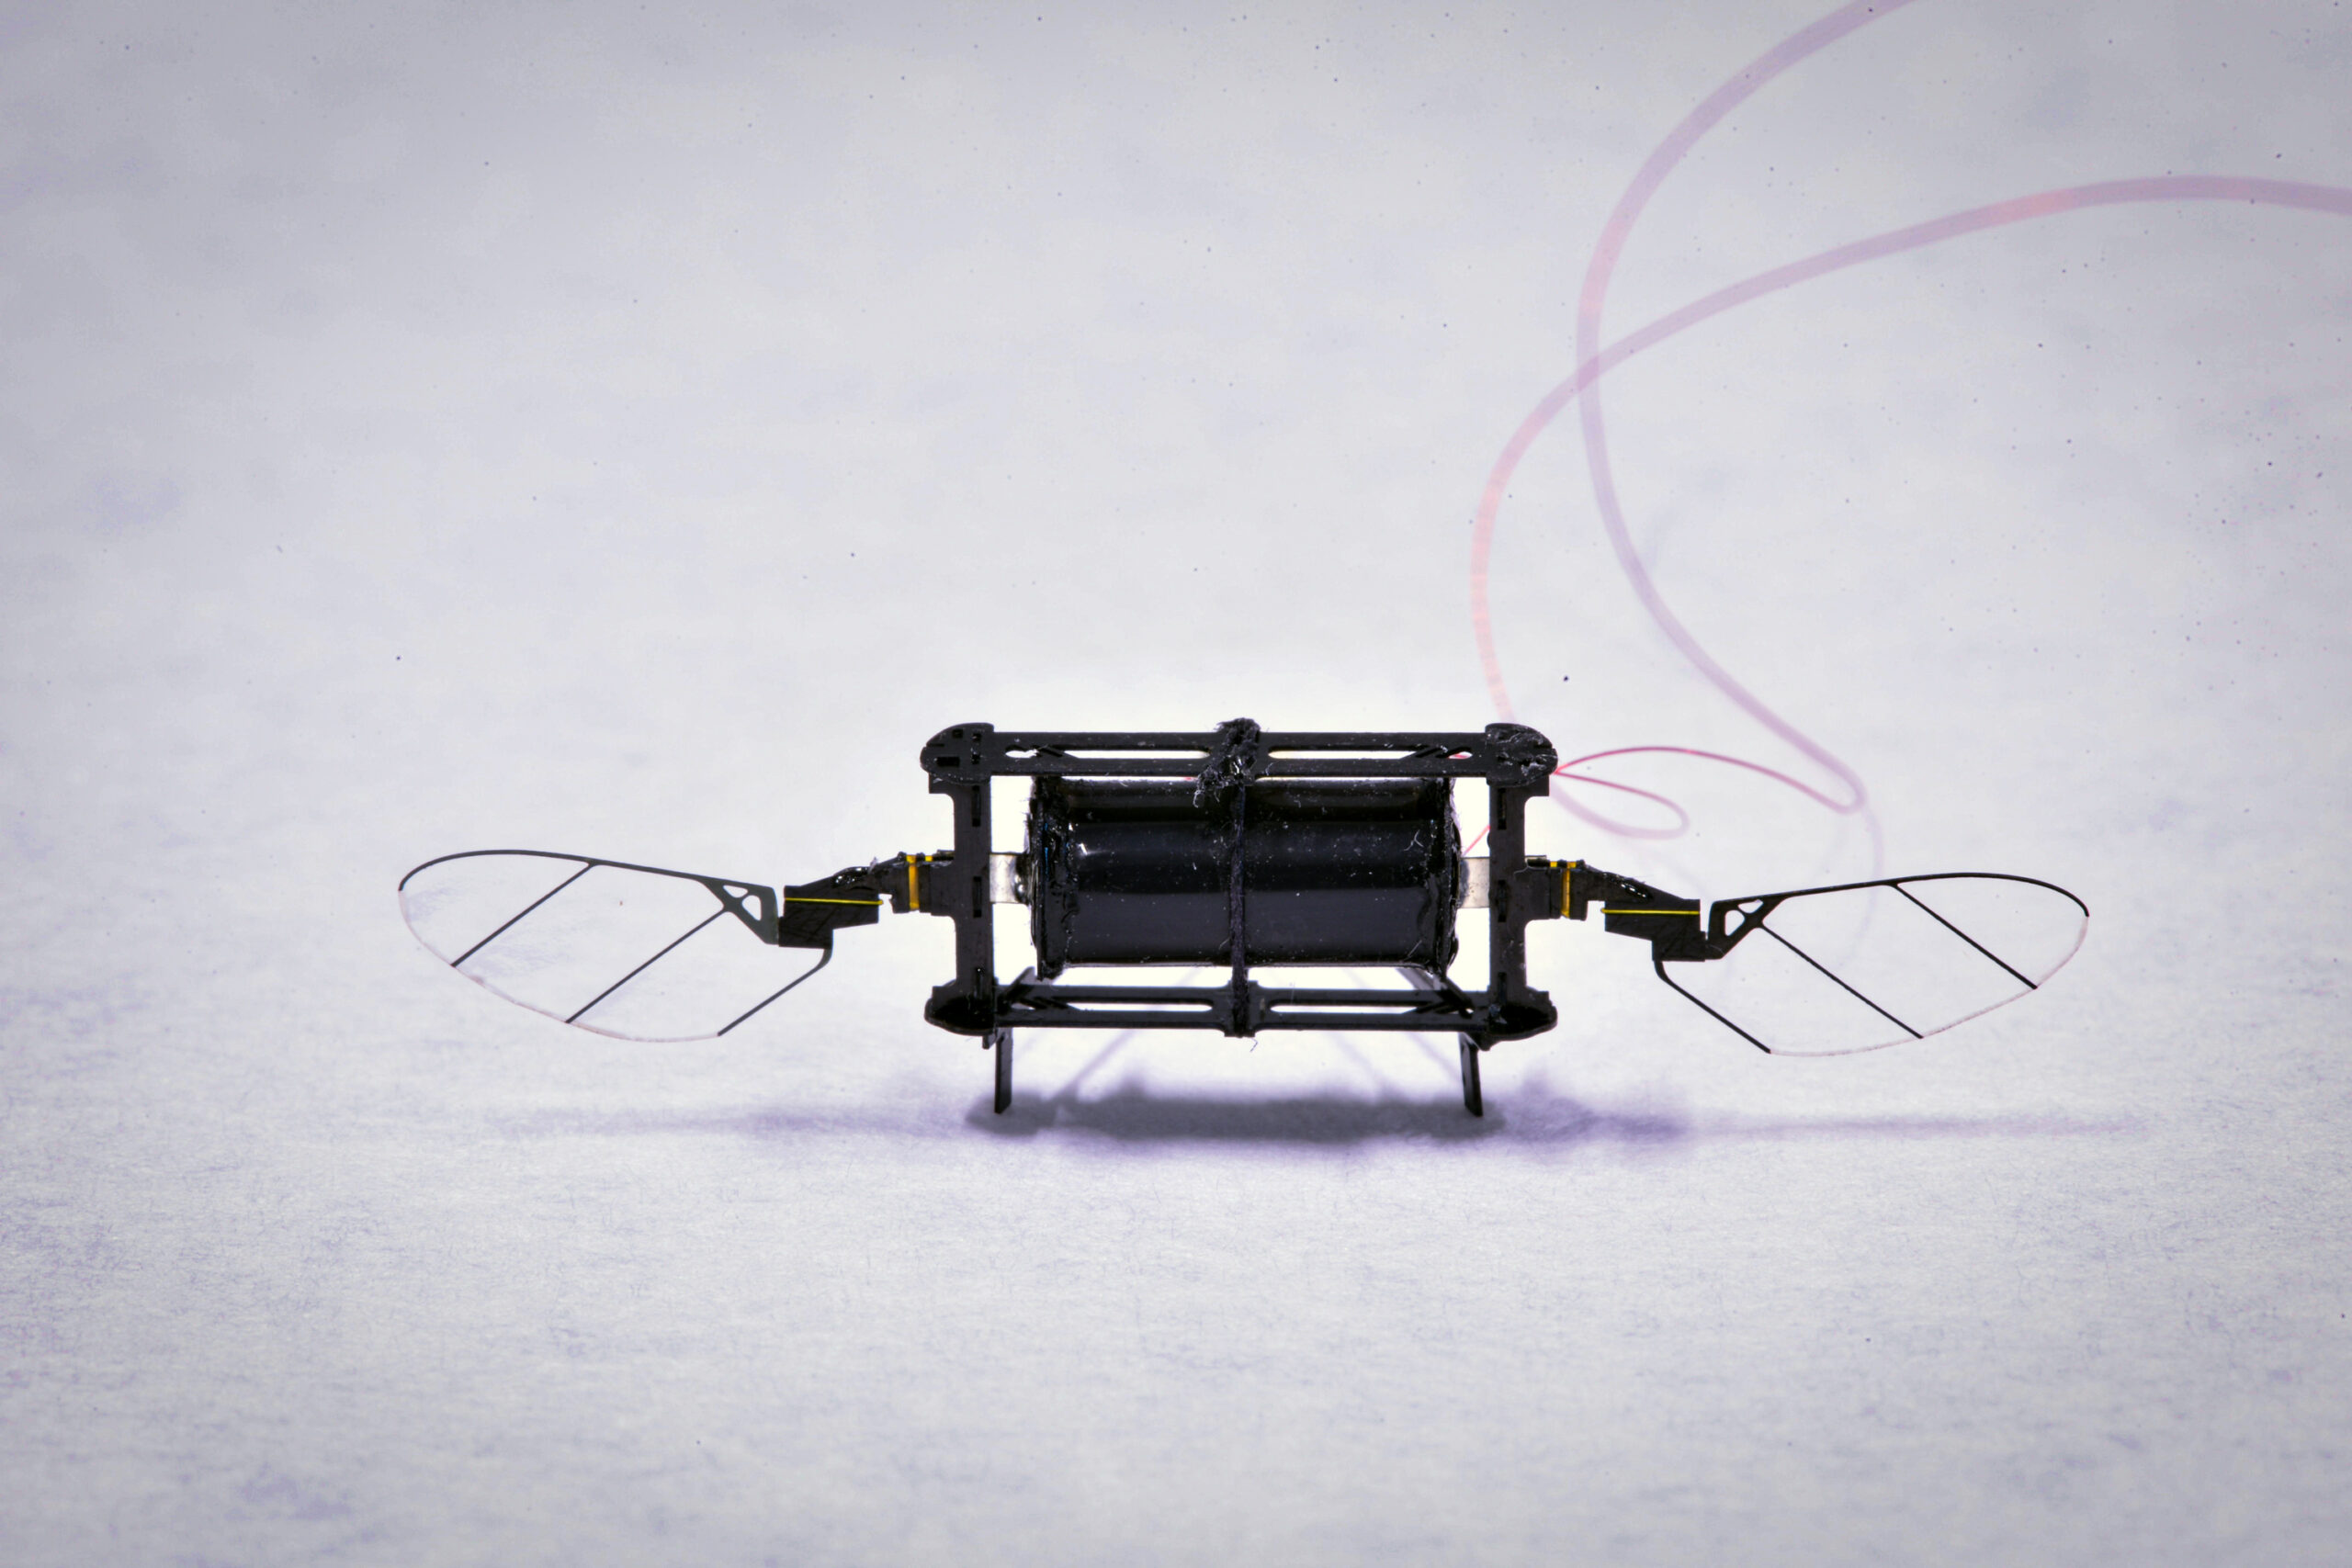 Georgia State researchers design artificial vision device for microrobots